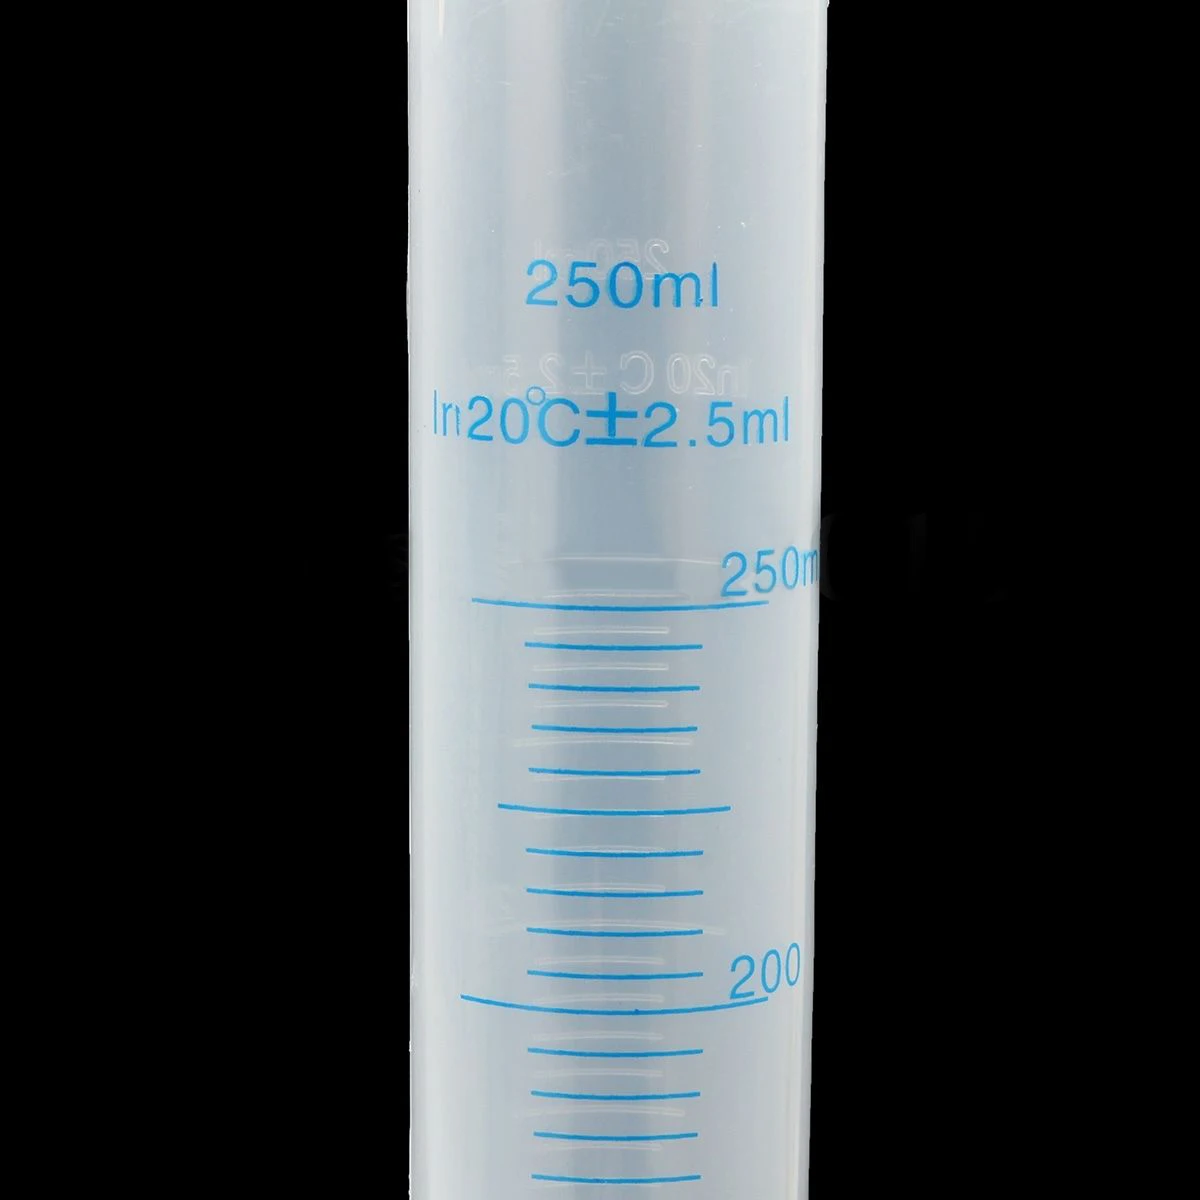 JX-LCLYL New 100/250ml Test Jar Plastic Tube For Beer and Wine Making Hydrometer Homebrew